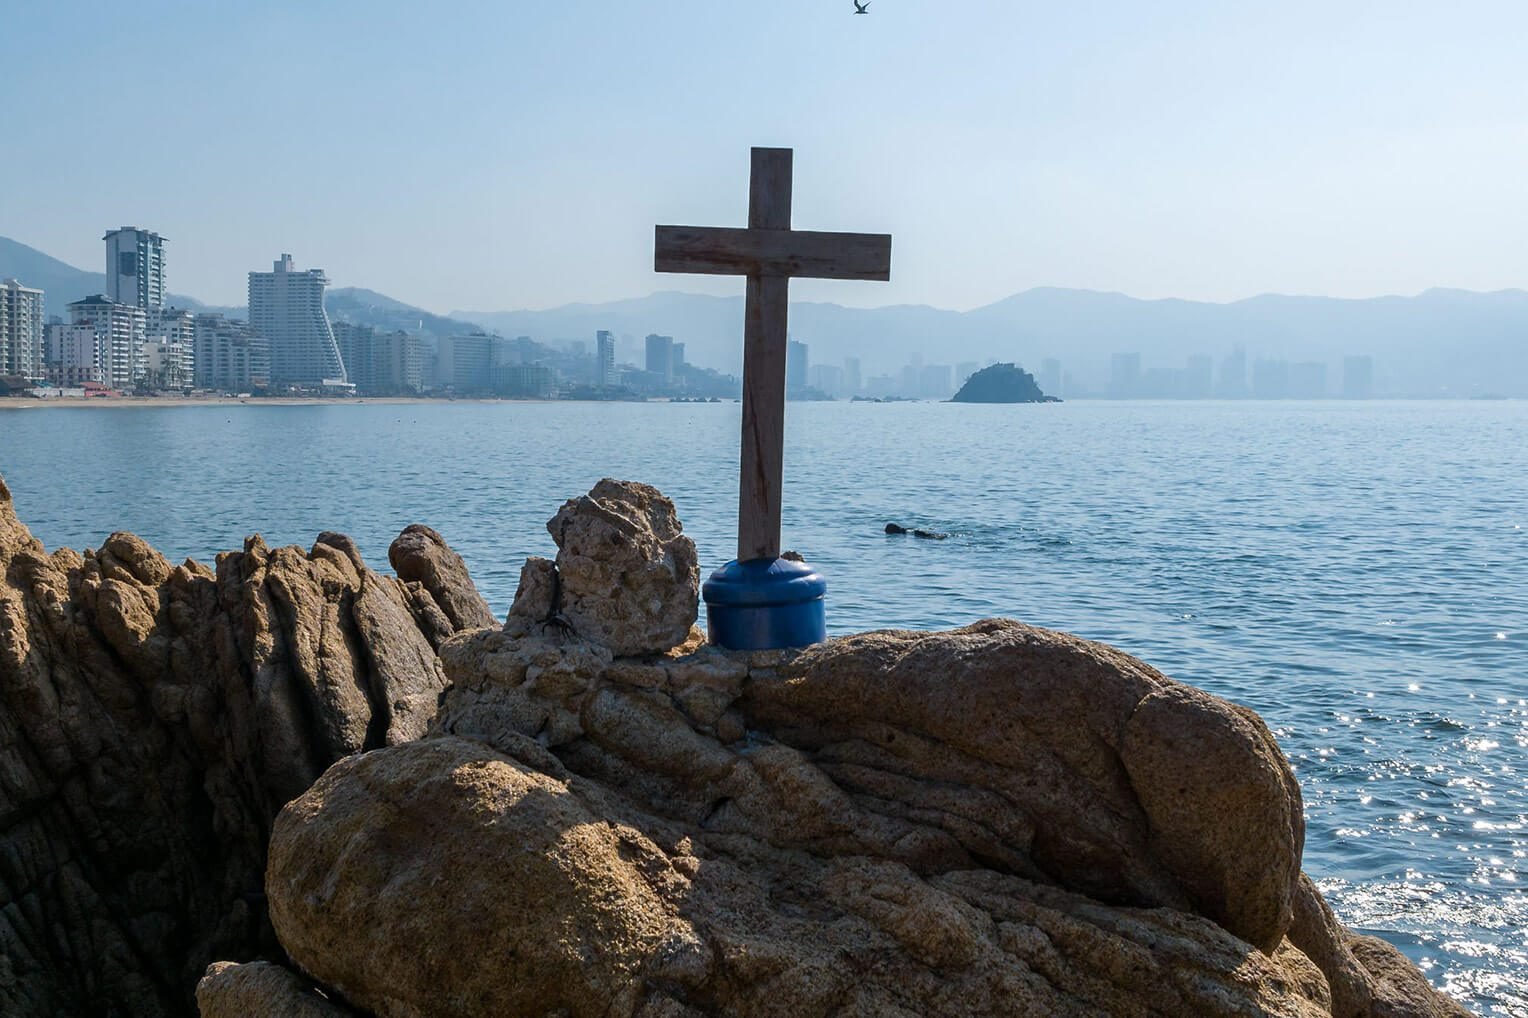 Pray for the people of Acapulco to lean on Christ as they work to rebuild their city.